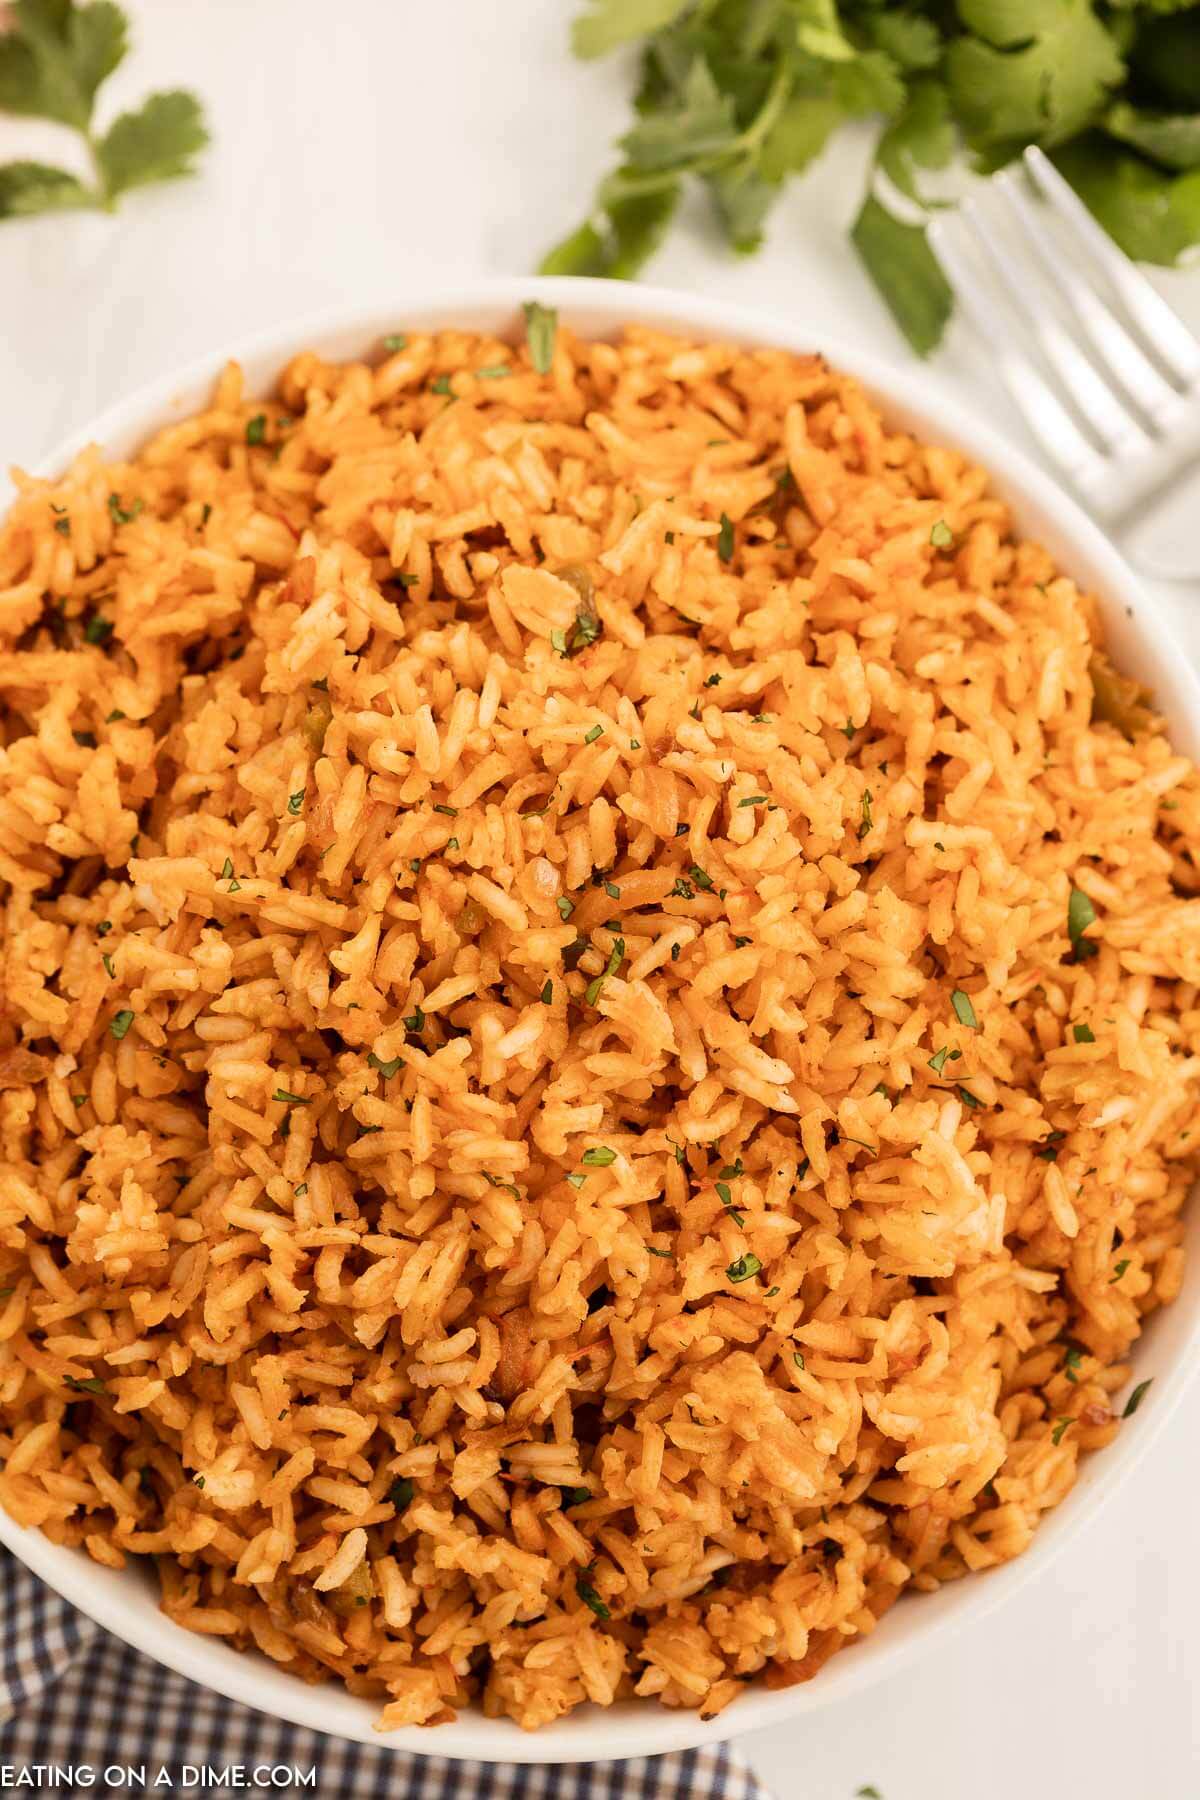 BEST Cajun Rice {Easy Recipe VIDEO} - Key To My Lime